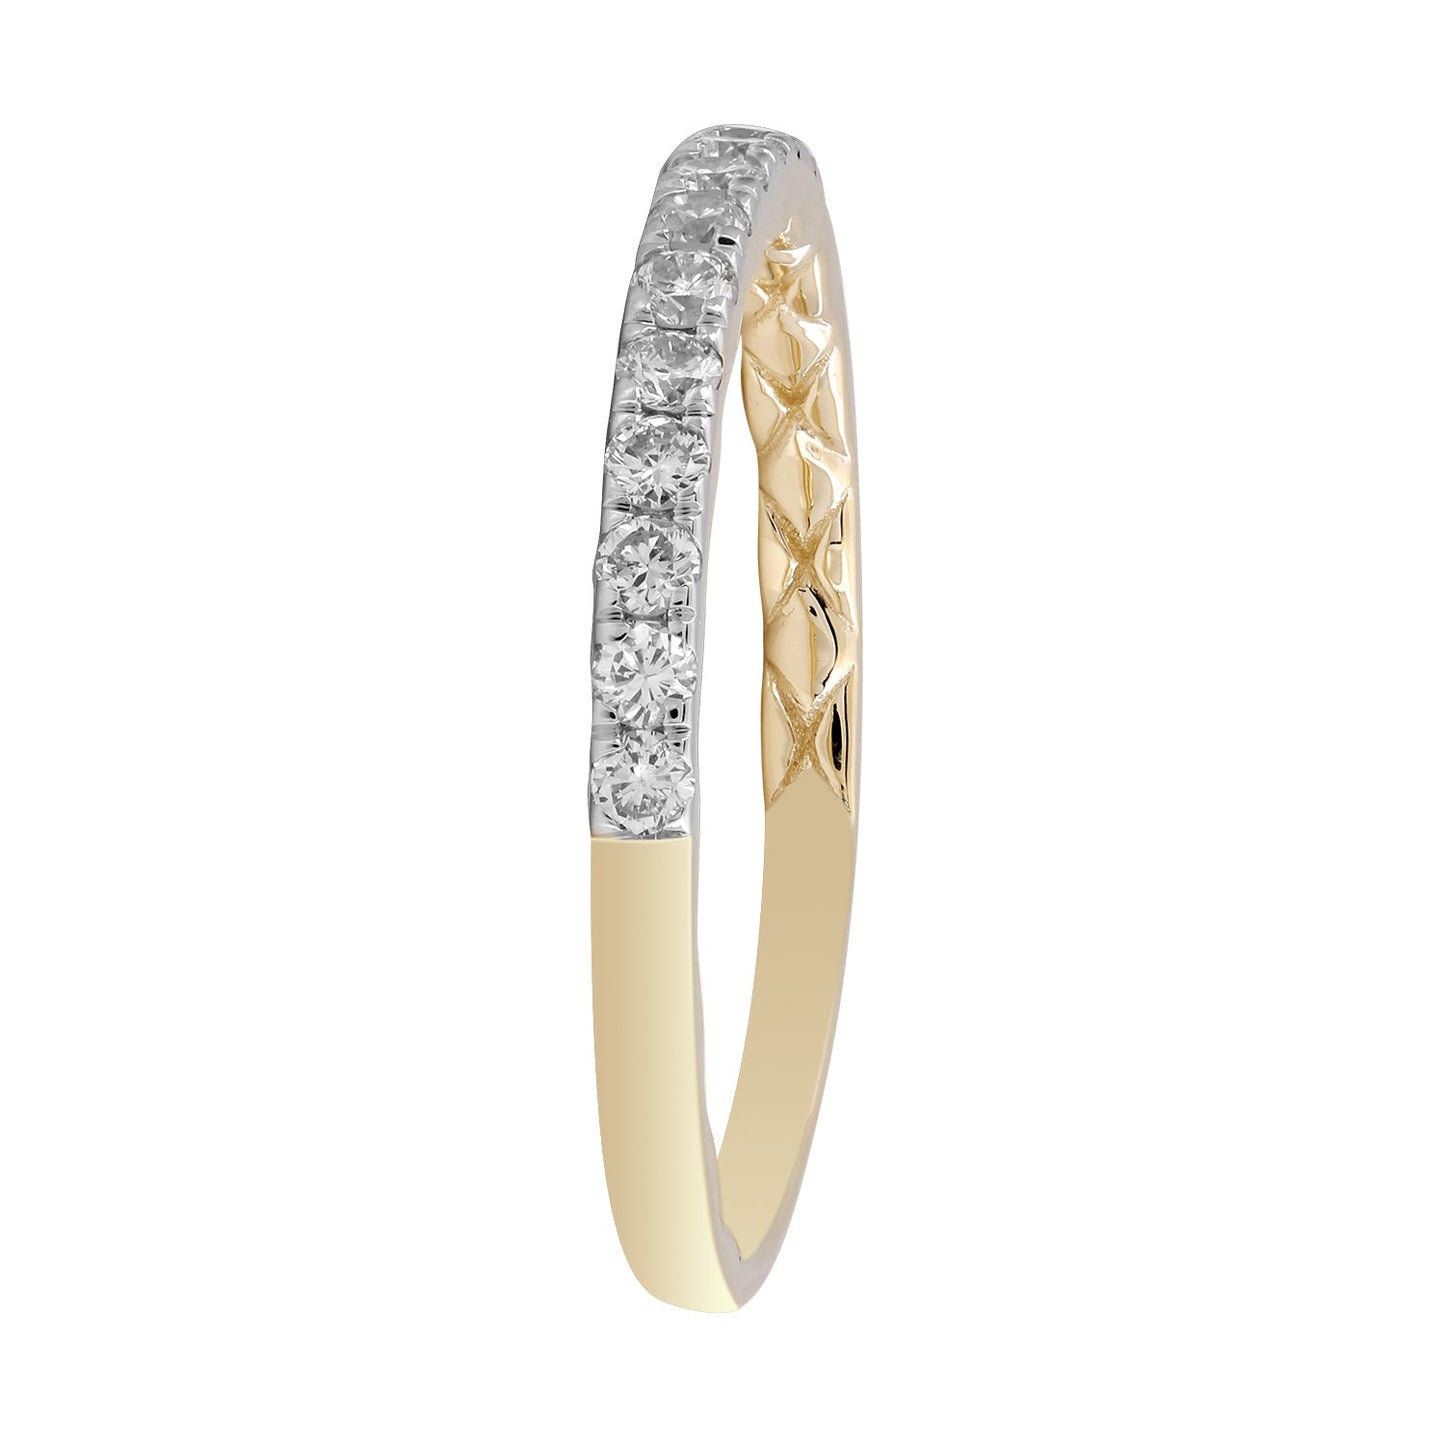 Diamond Band Ring with 0.25ct Diamonds in 18K Yellow Gold